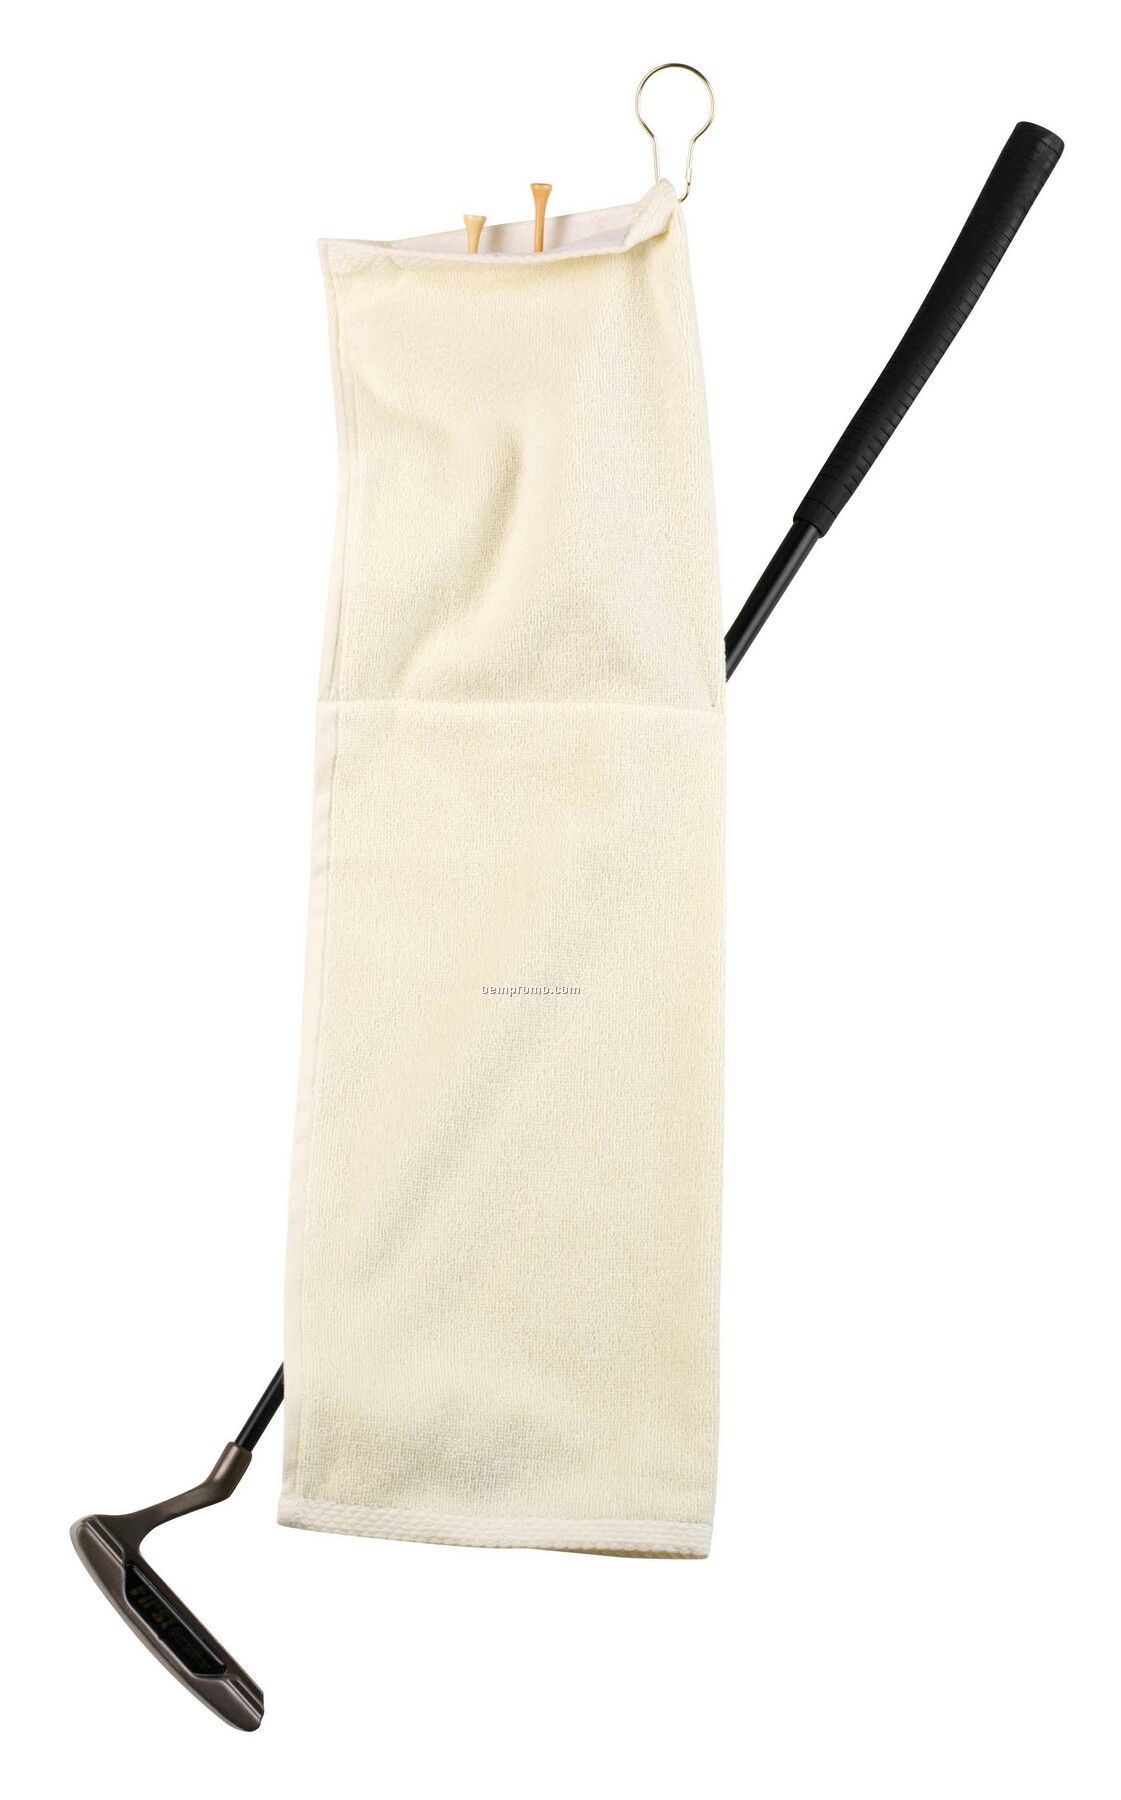 The Turnberry Pouch Golf Towel With Hook & Grommet